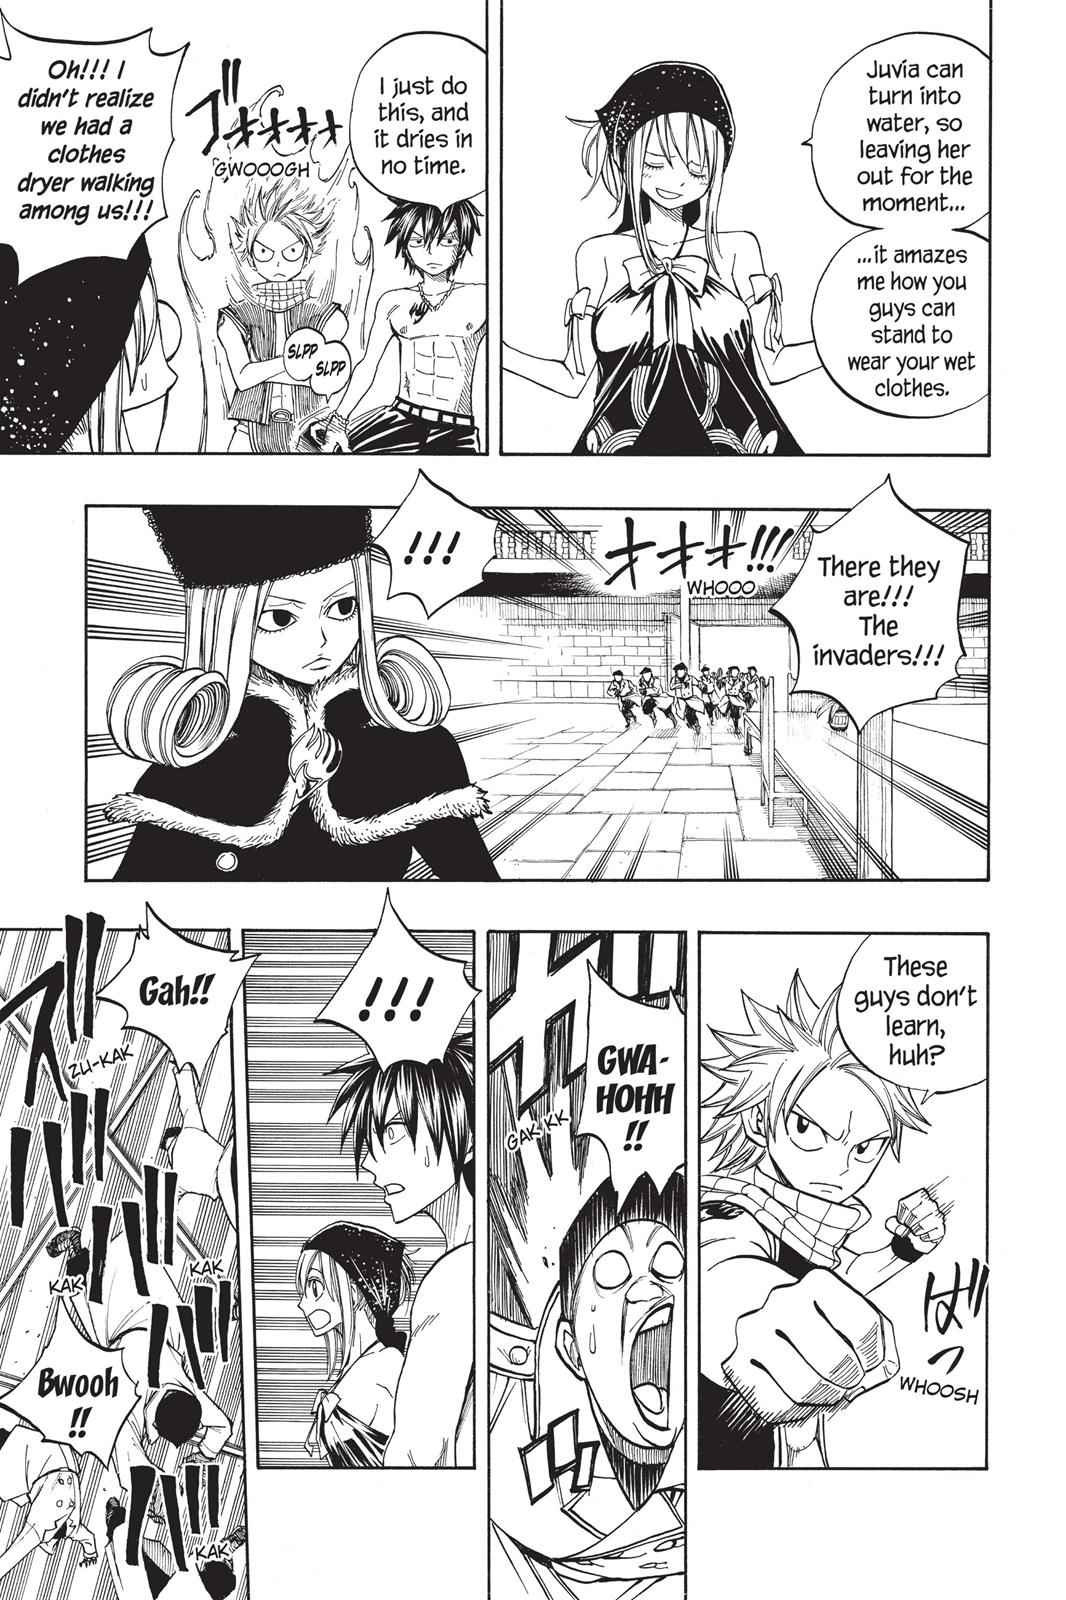  Chapter 80 image 005